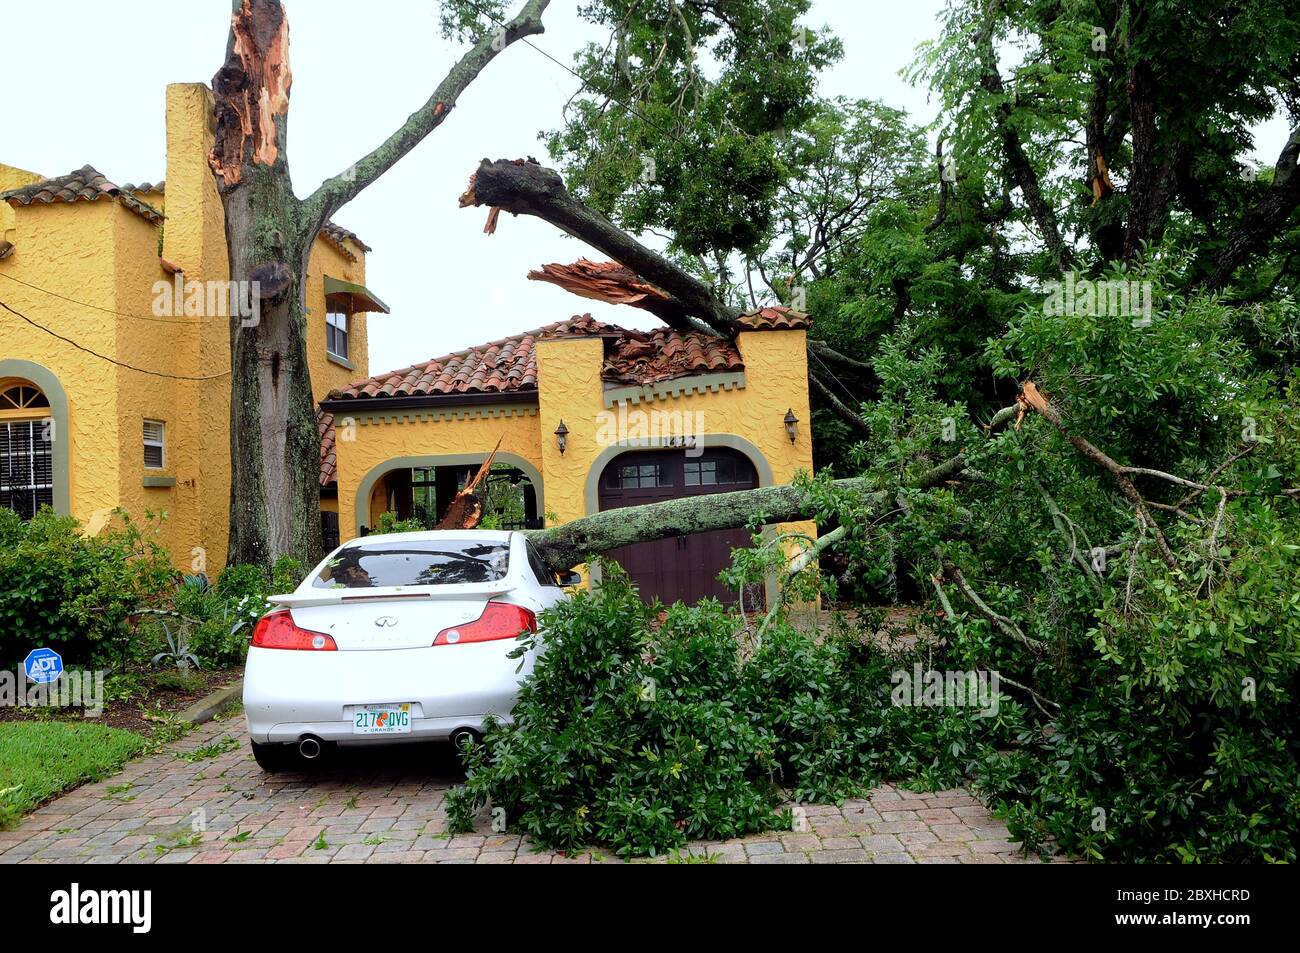 Orlando, United States. 07th June, 2020. June 7, 2020 - Orlando, Florida, United States - A garage and car are seen damaged by a fallen tree after a tornado spawned by Tropical Storm Cristobal passed through Orlando, Florida on June 6, 2020. Credit: Paul Hennessy/Alamy Live News Stock Photo